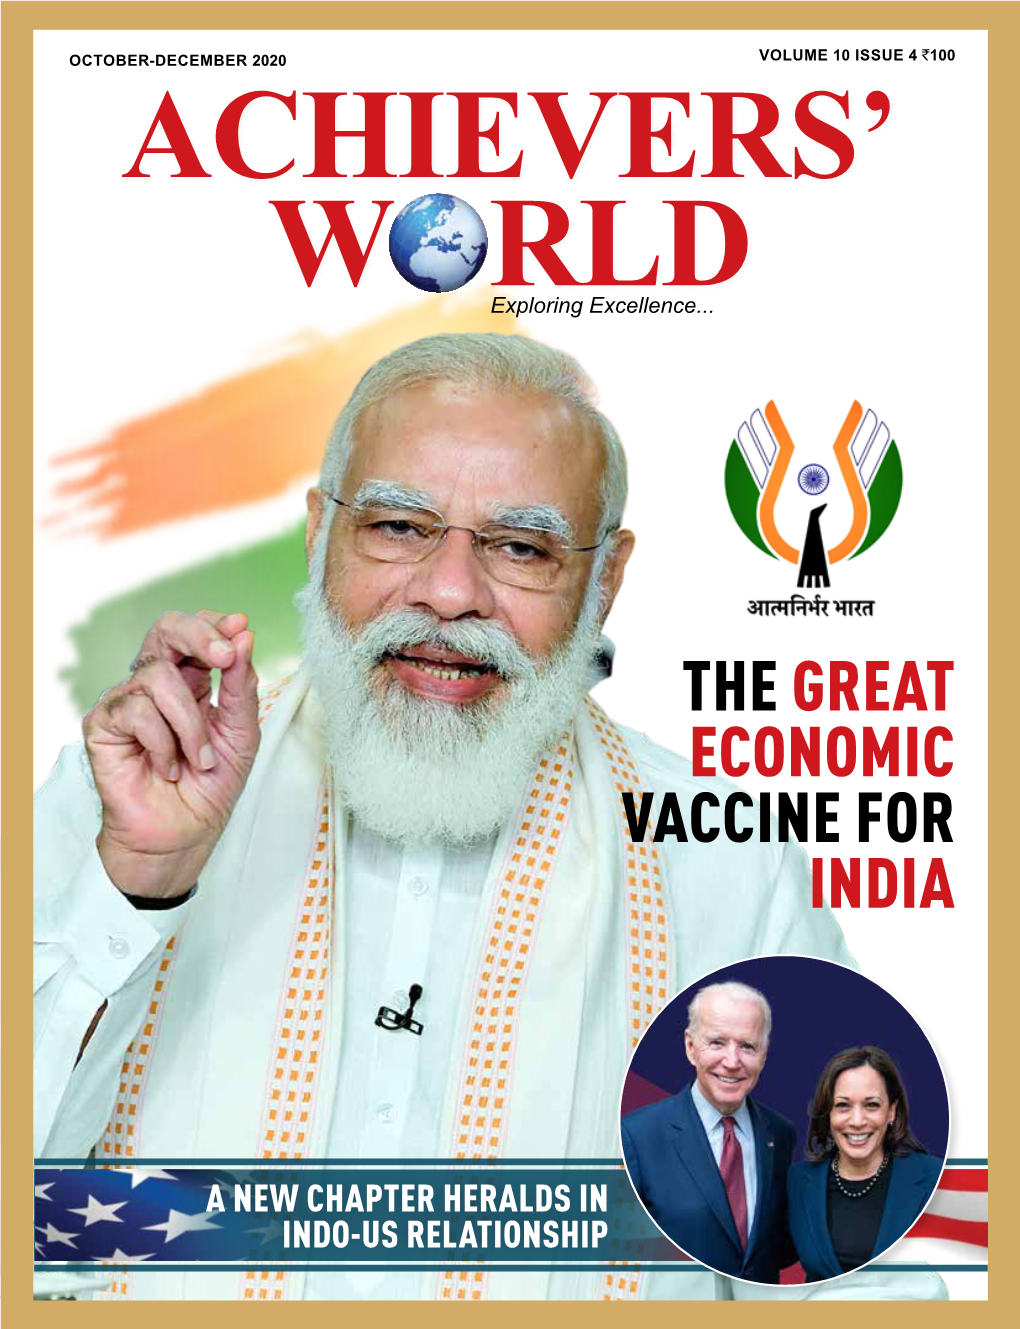 The Great Economic Vaccine for India